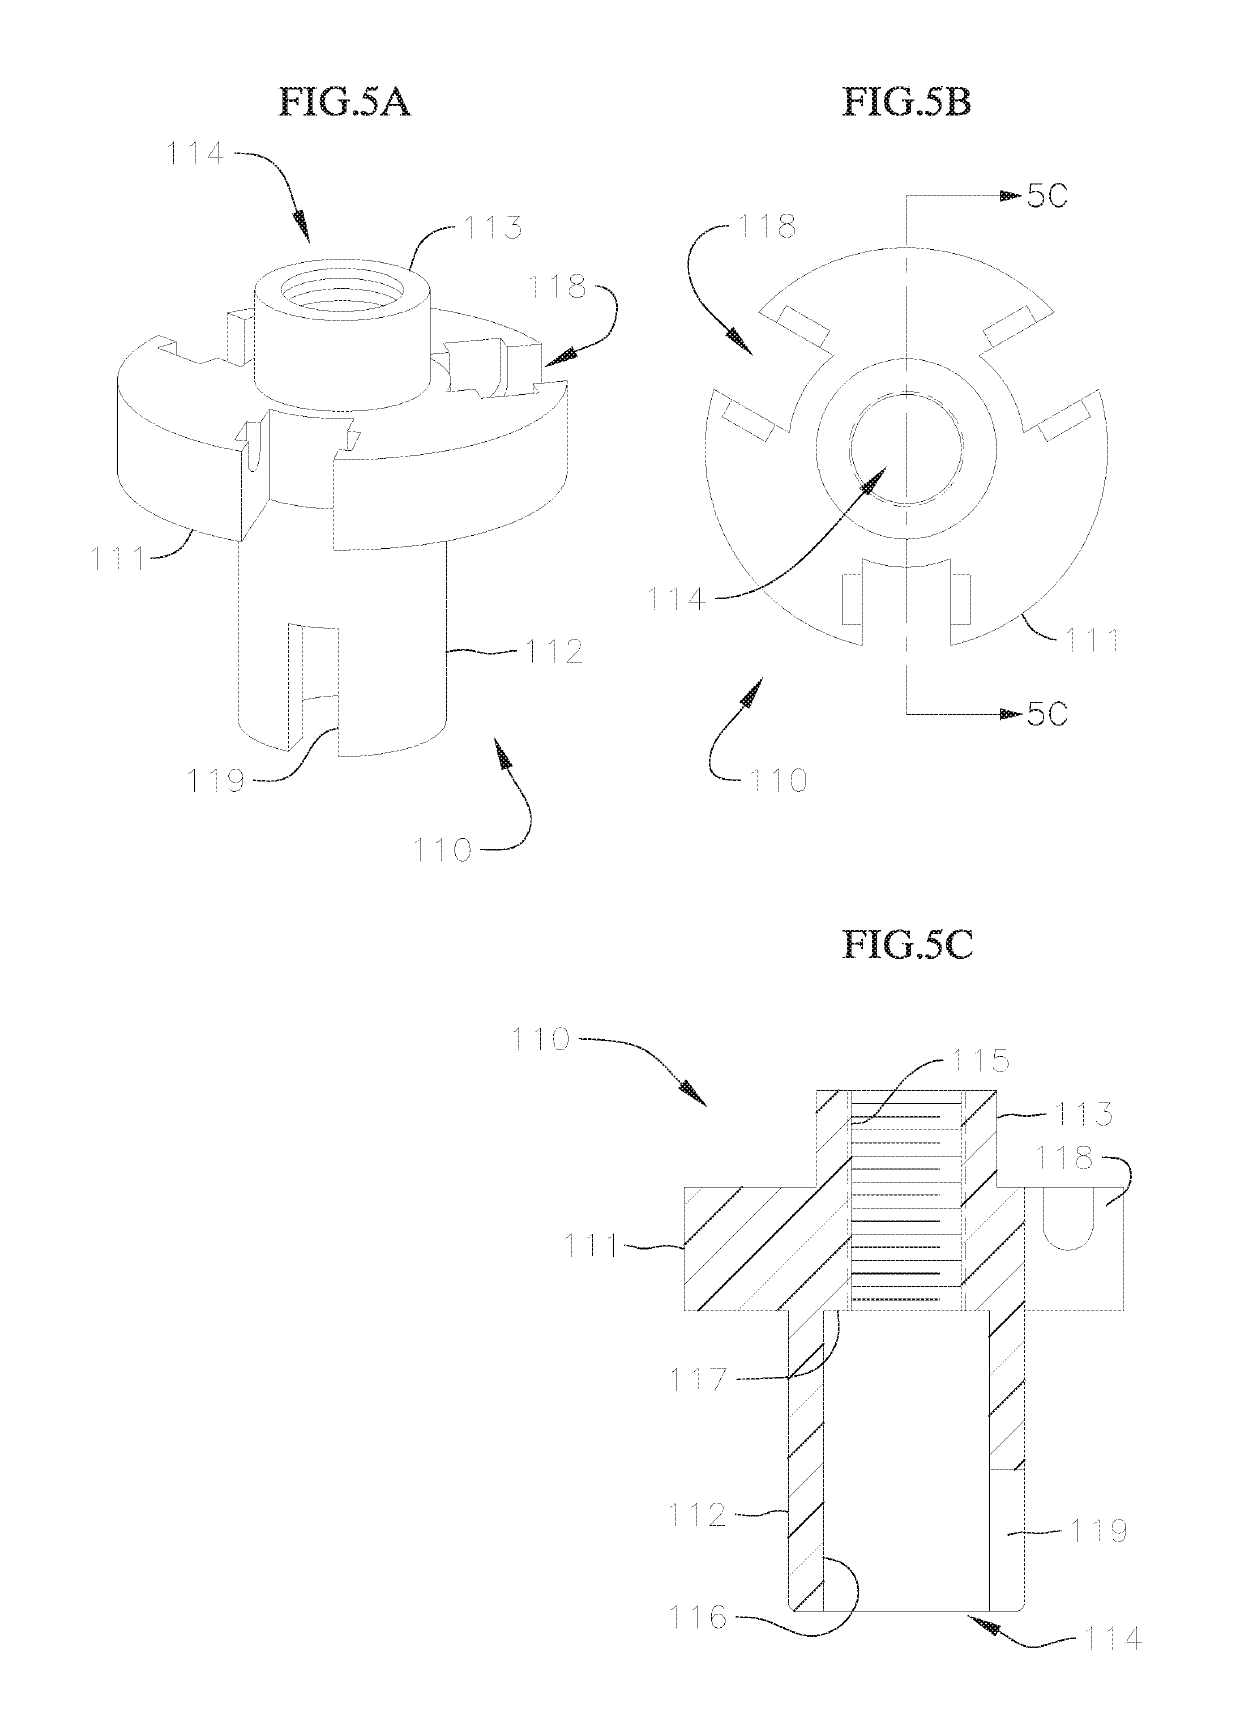 Prosthetic valve holders with automatic deploying mechanisms